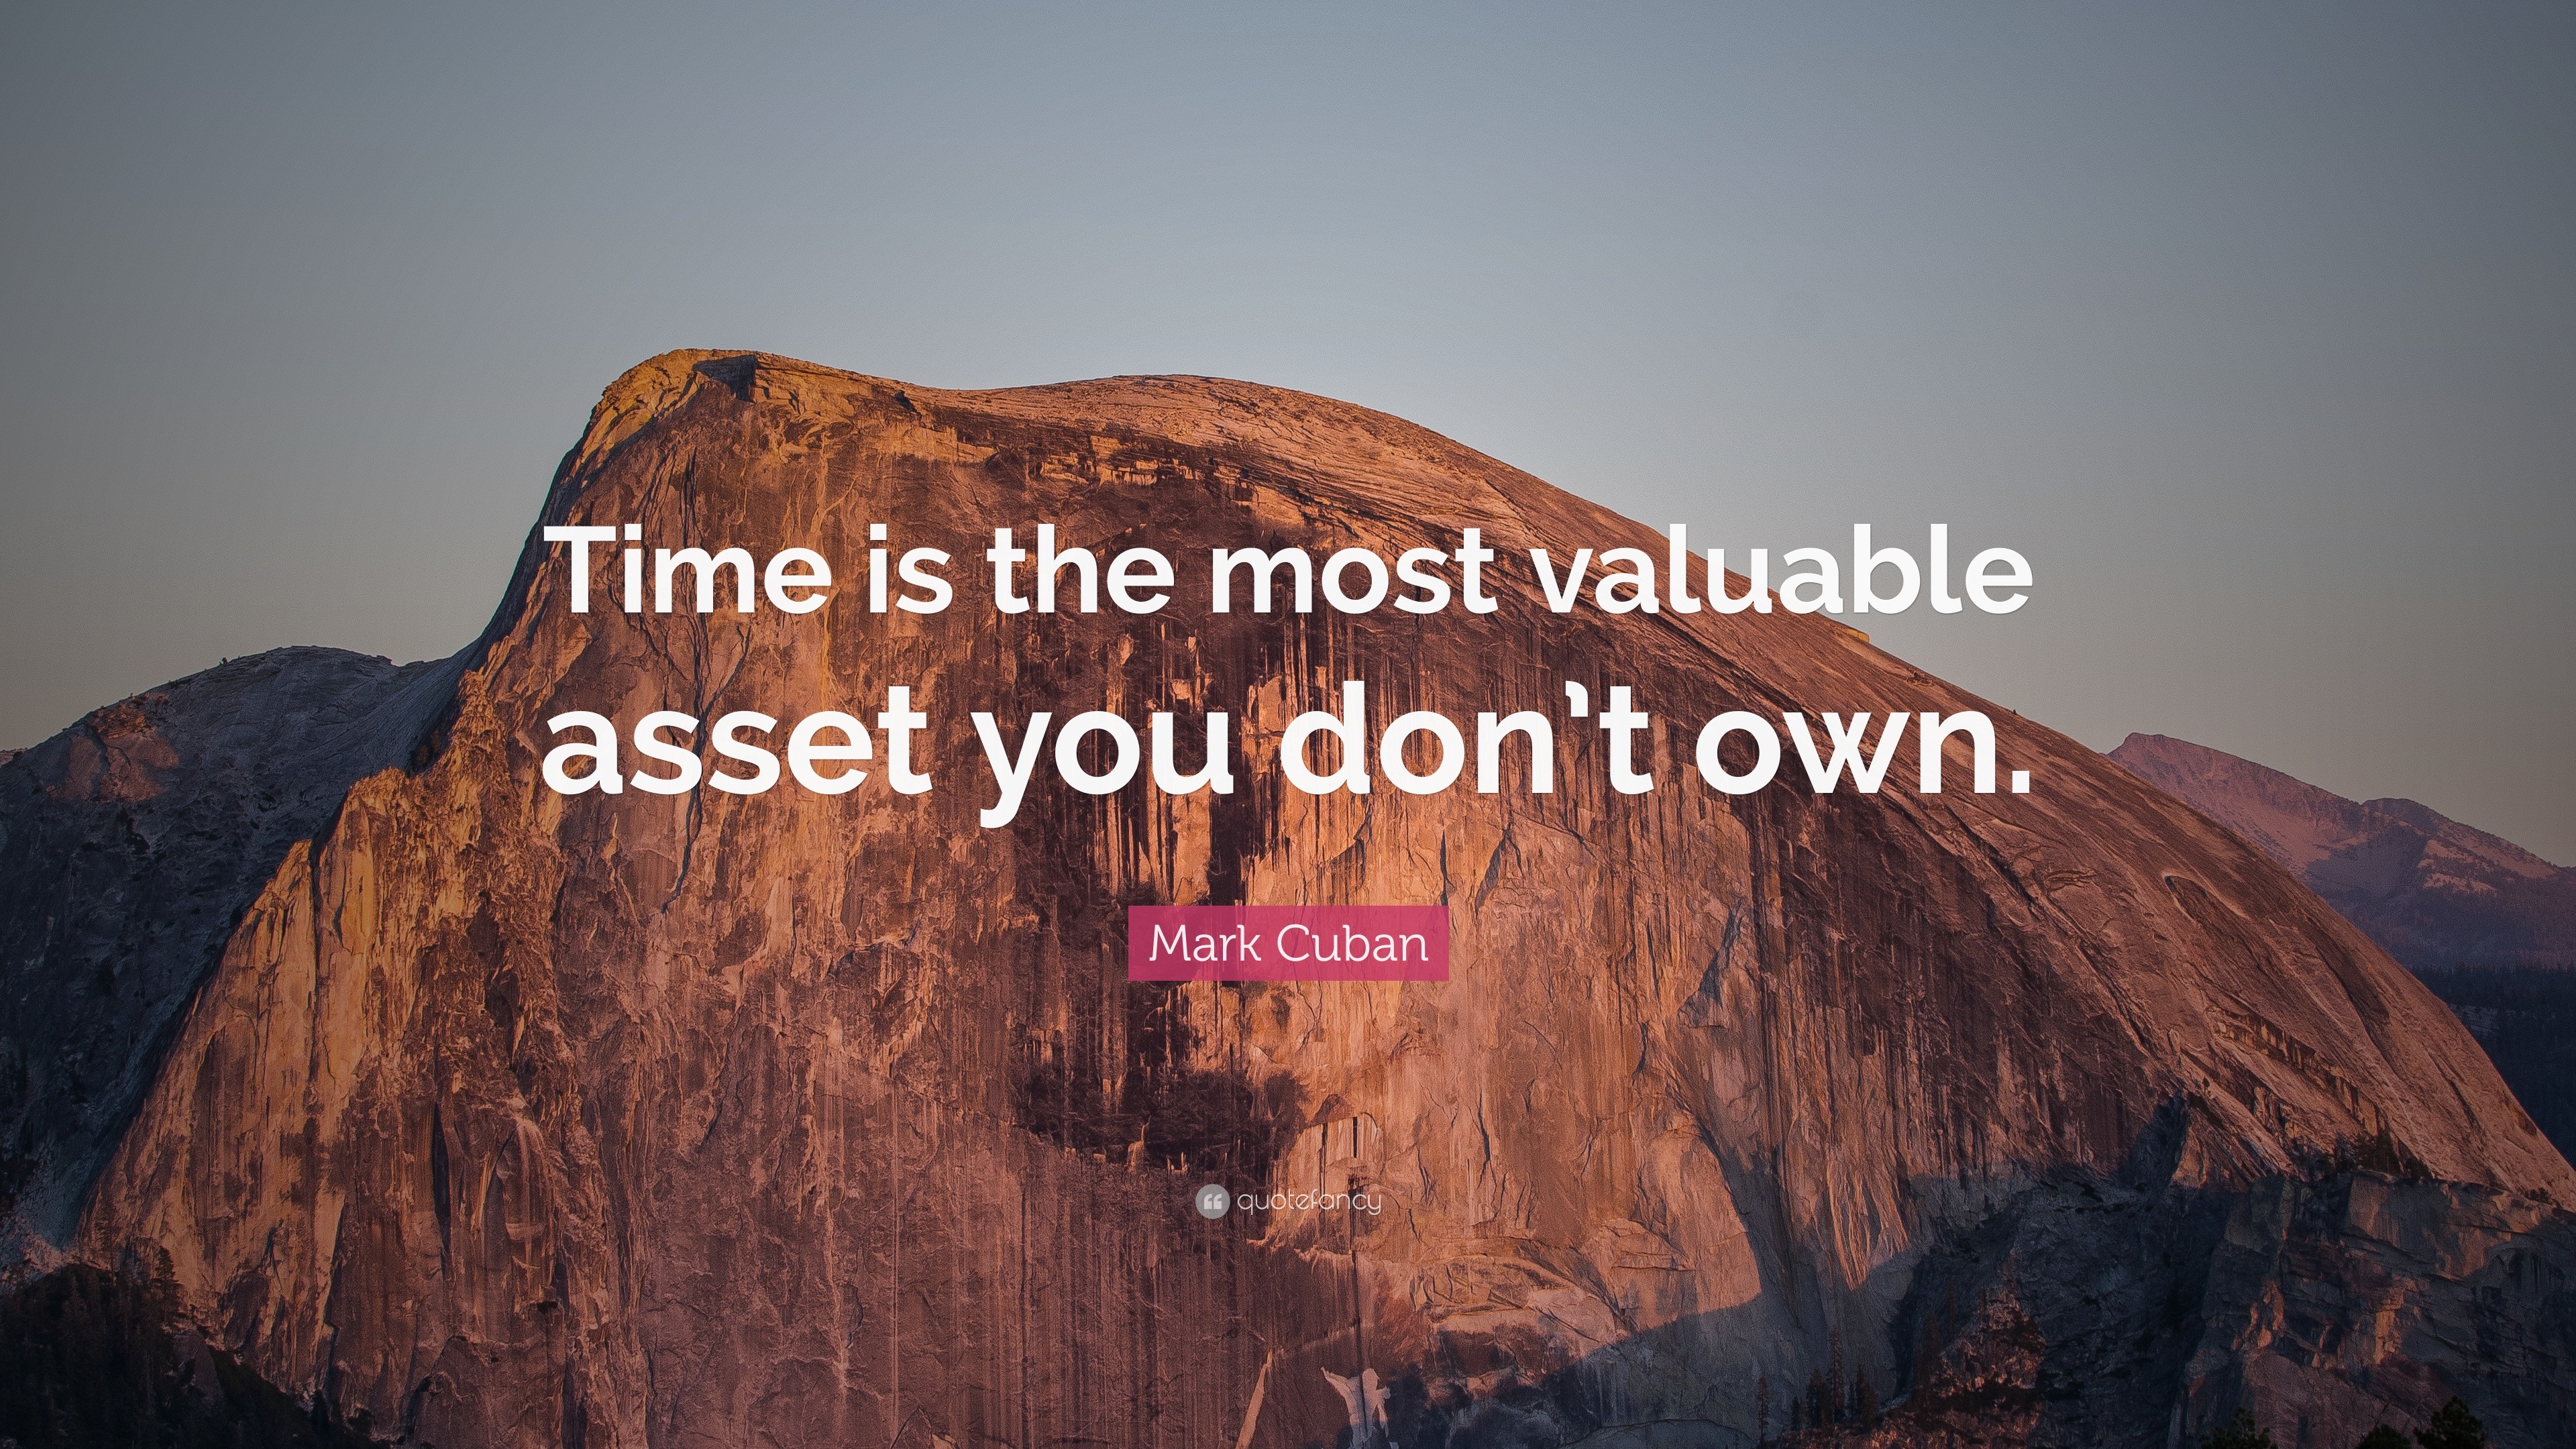 Mark Cuban Quote: “Time is the most valuable asset you don't own